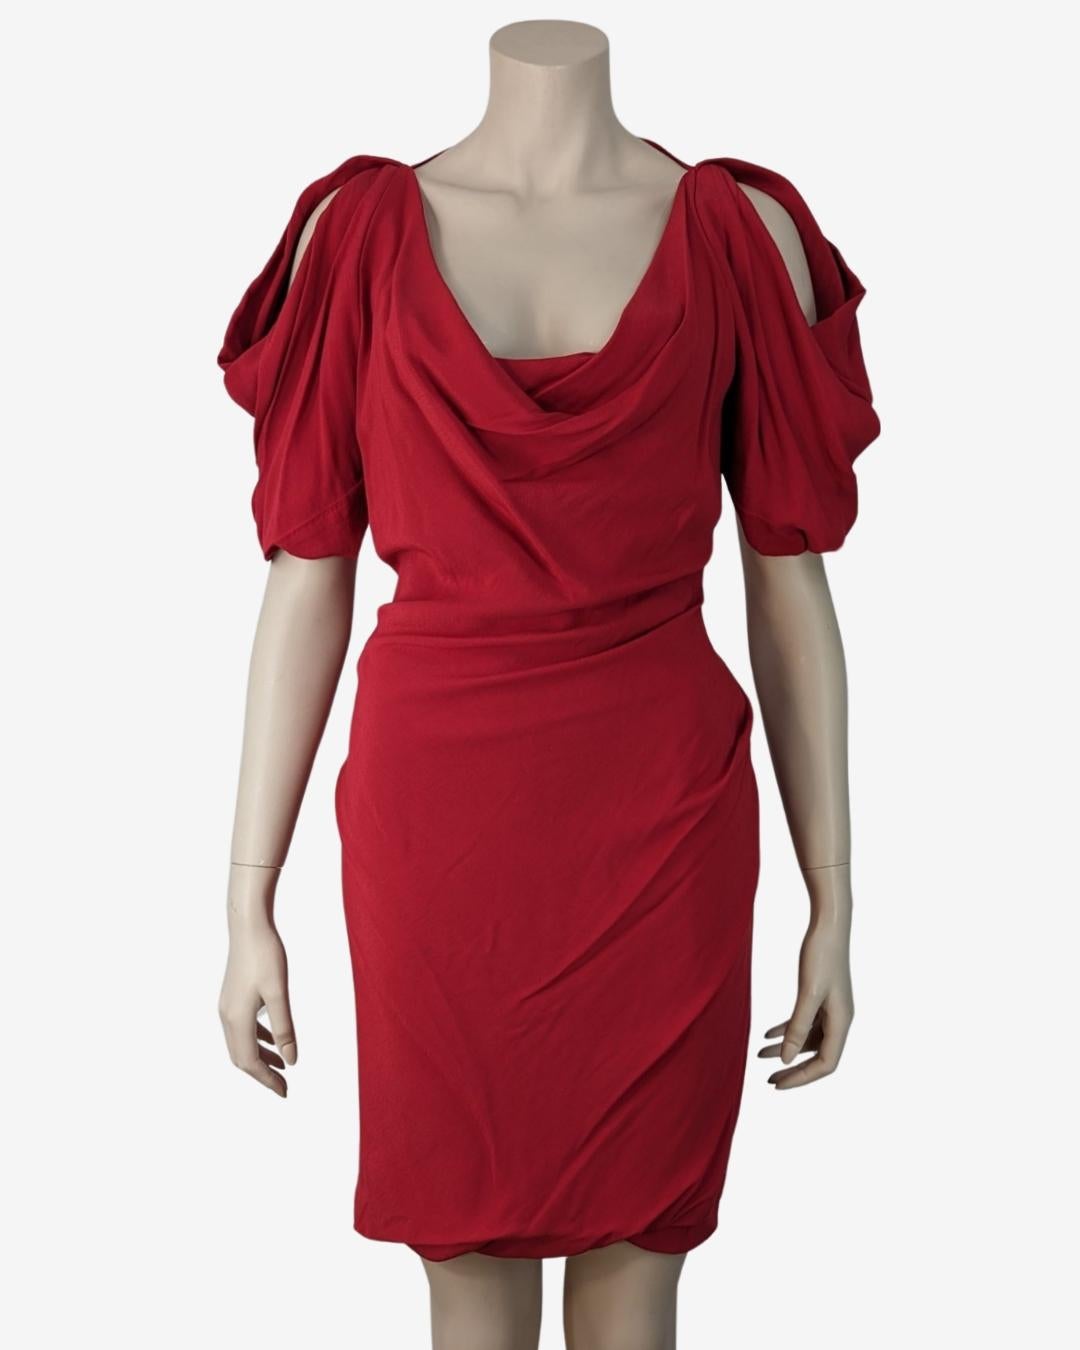 By Vivienne Westwood - Mini dress featuring draped detailing, square neckline and open puff sleeves.

Size Fits XS, S 

Tag label top S  

 
Colors : Red

Content : 100% viscose

Condition : 9/10 Like new 

Made in Italy.

VWD0053

 

